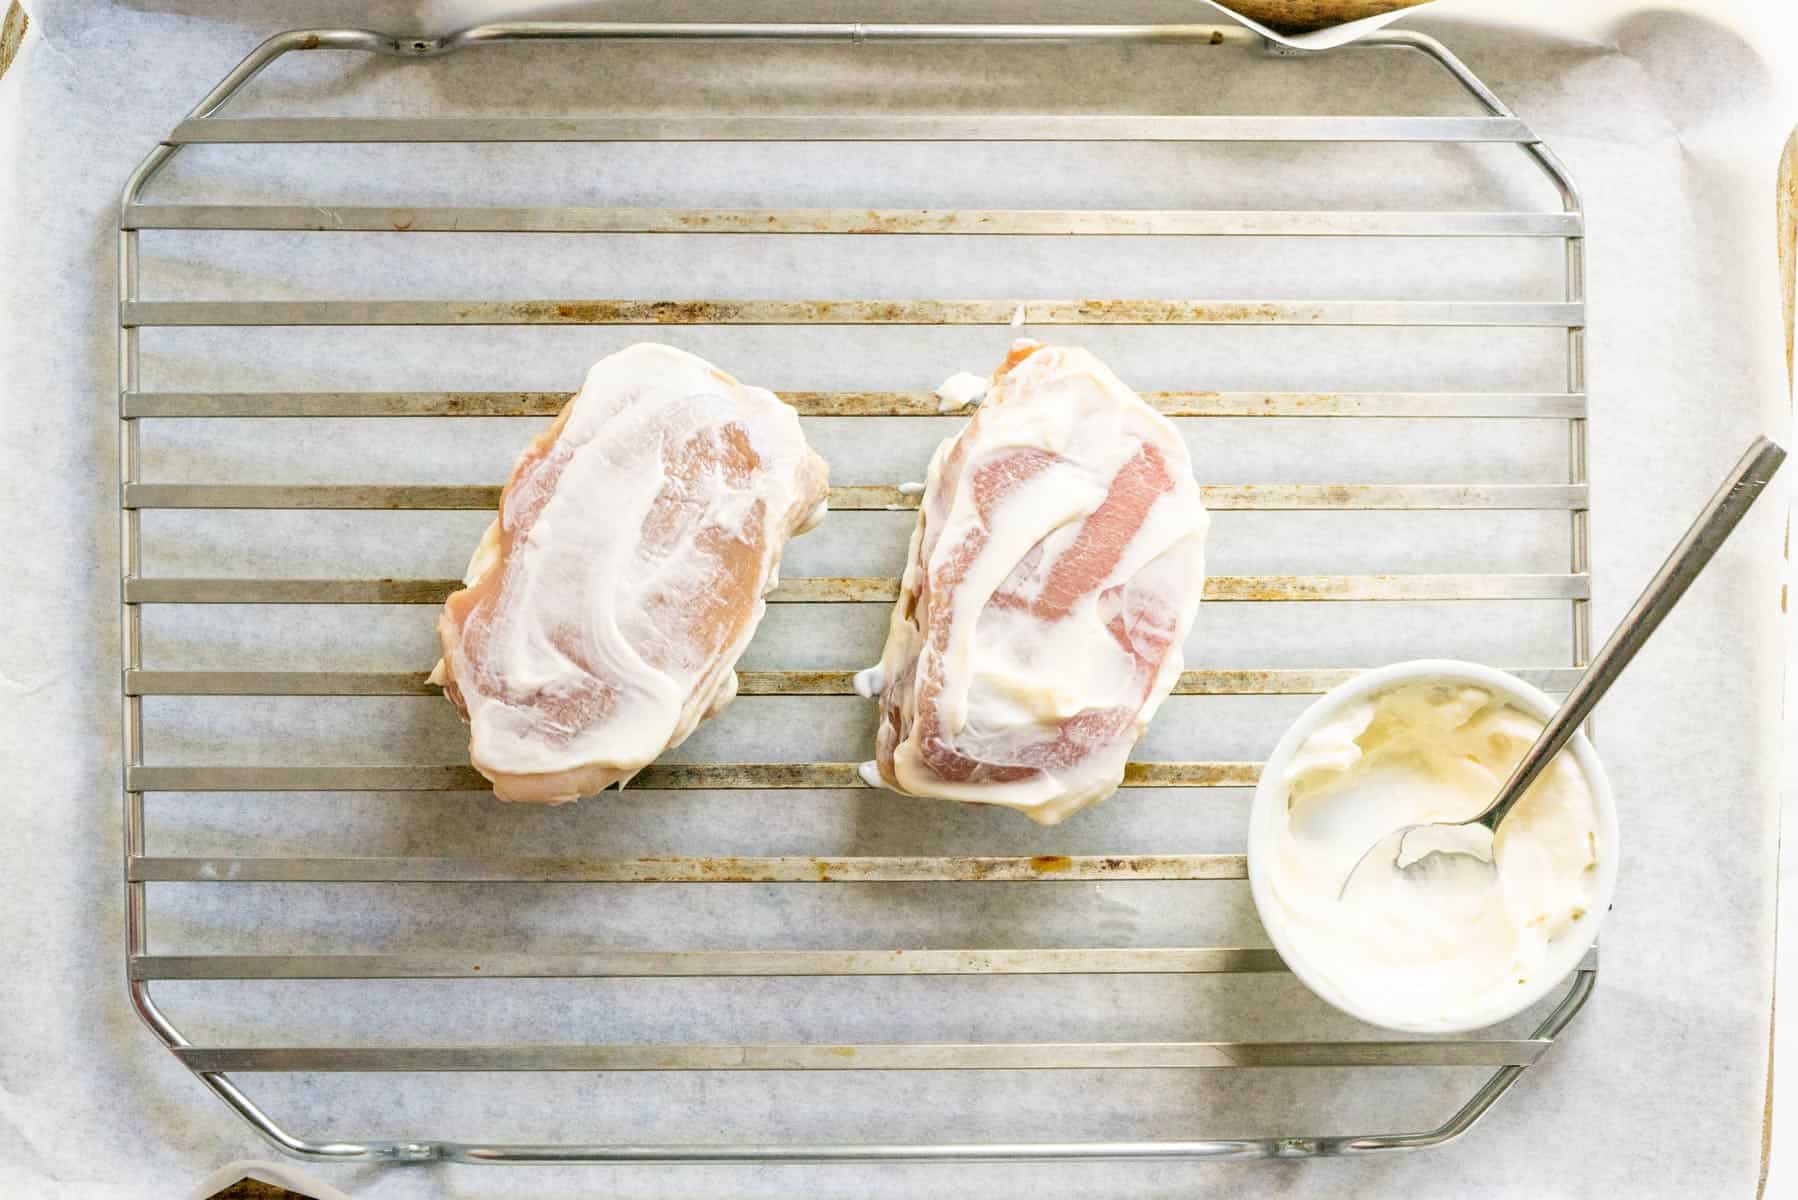 2 pork chops with mayonnaise on them on a wire rack